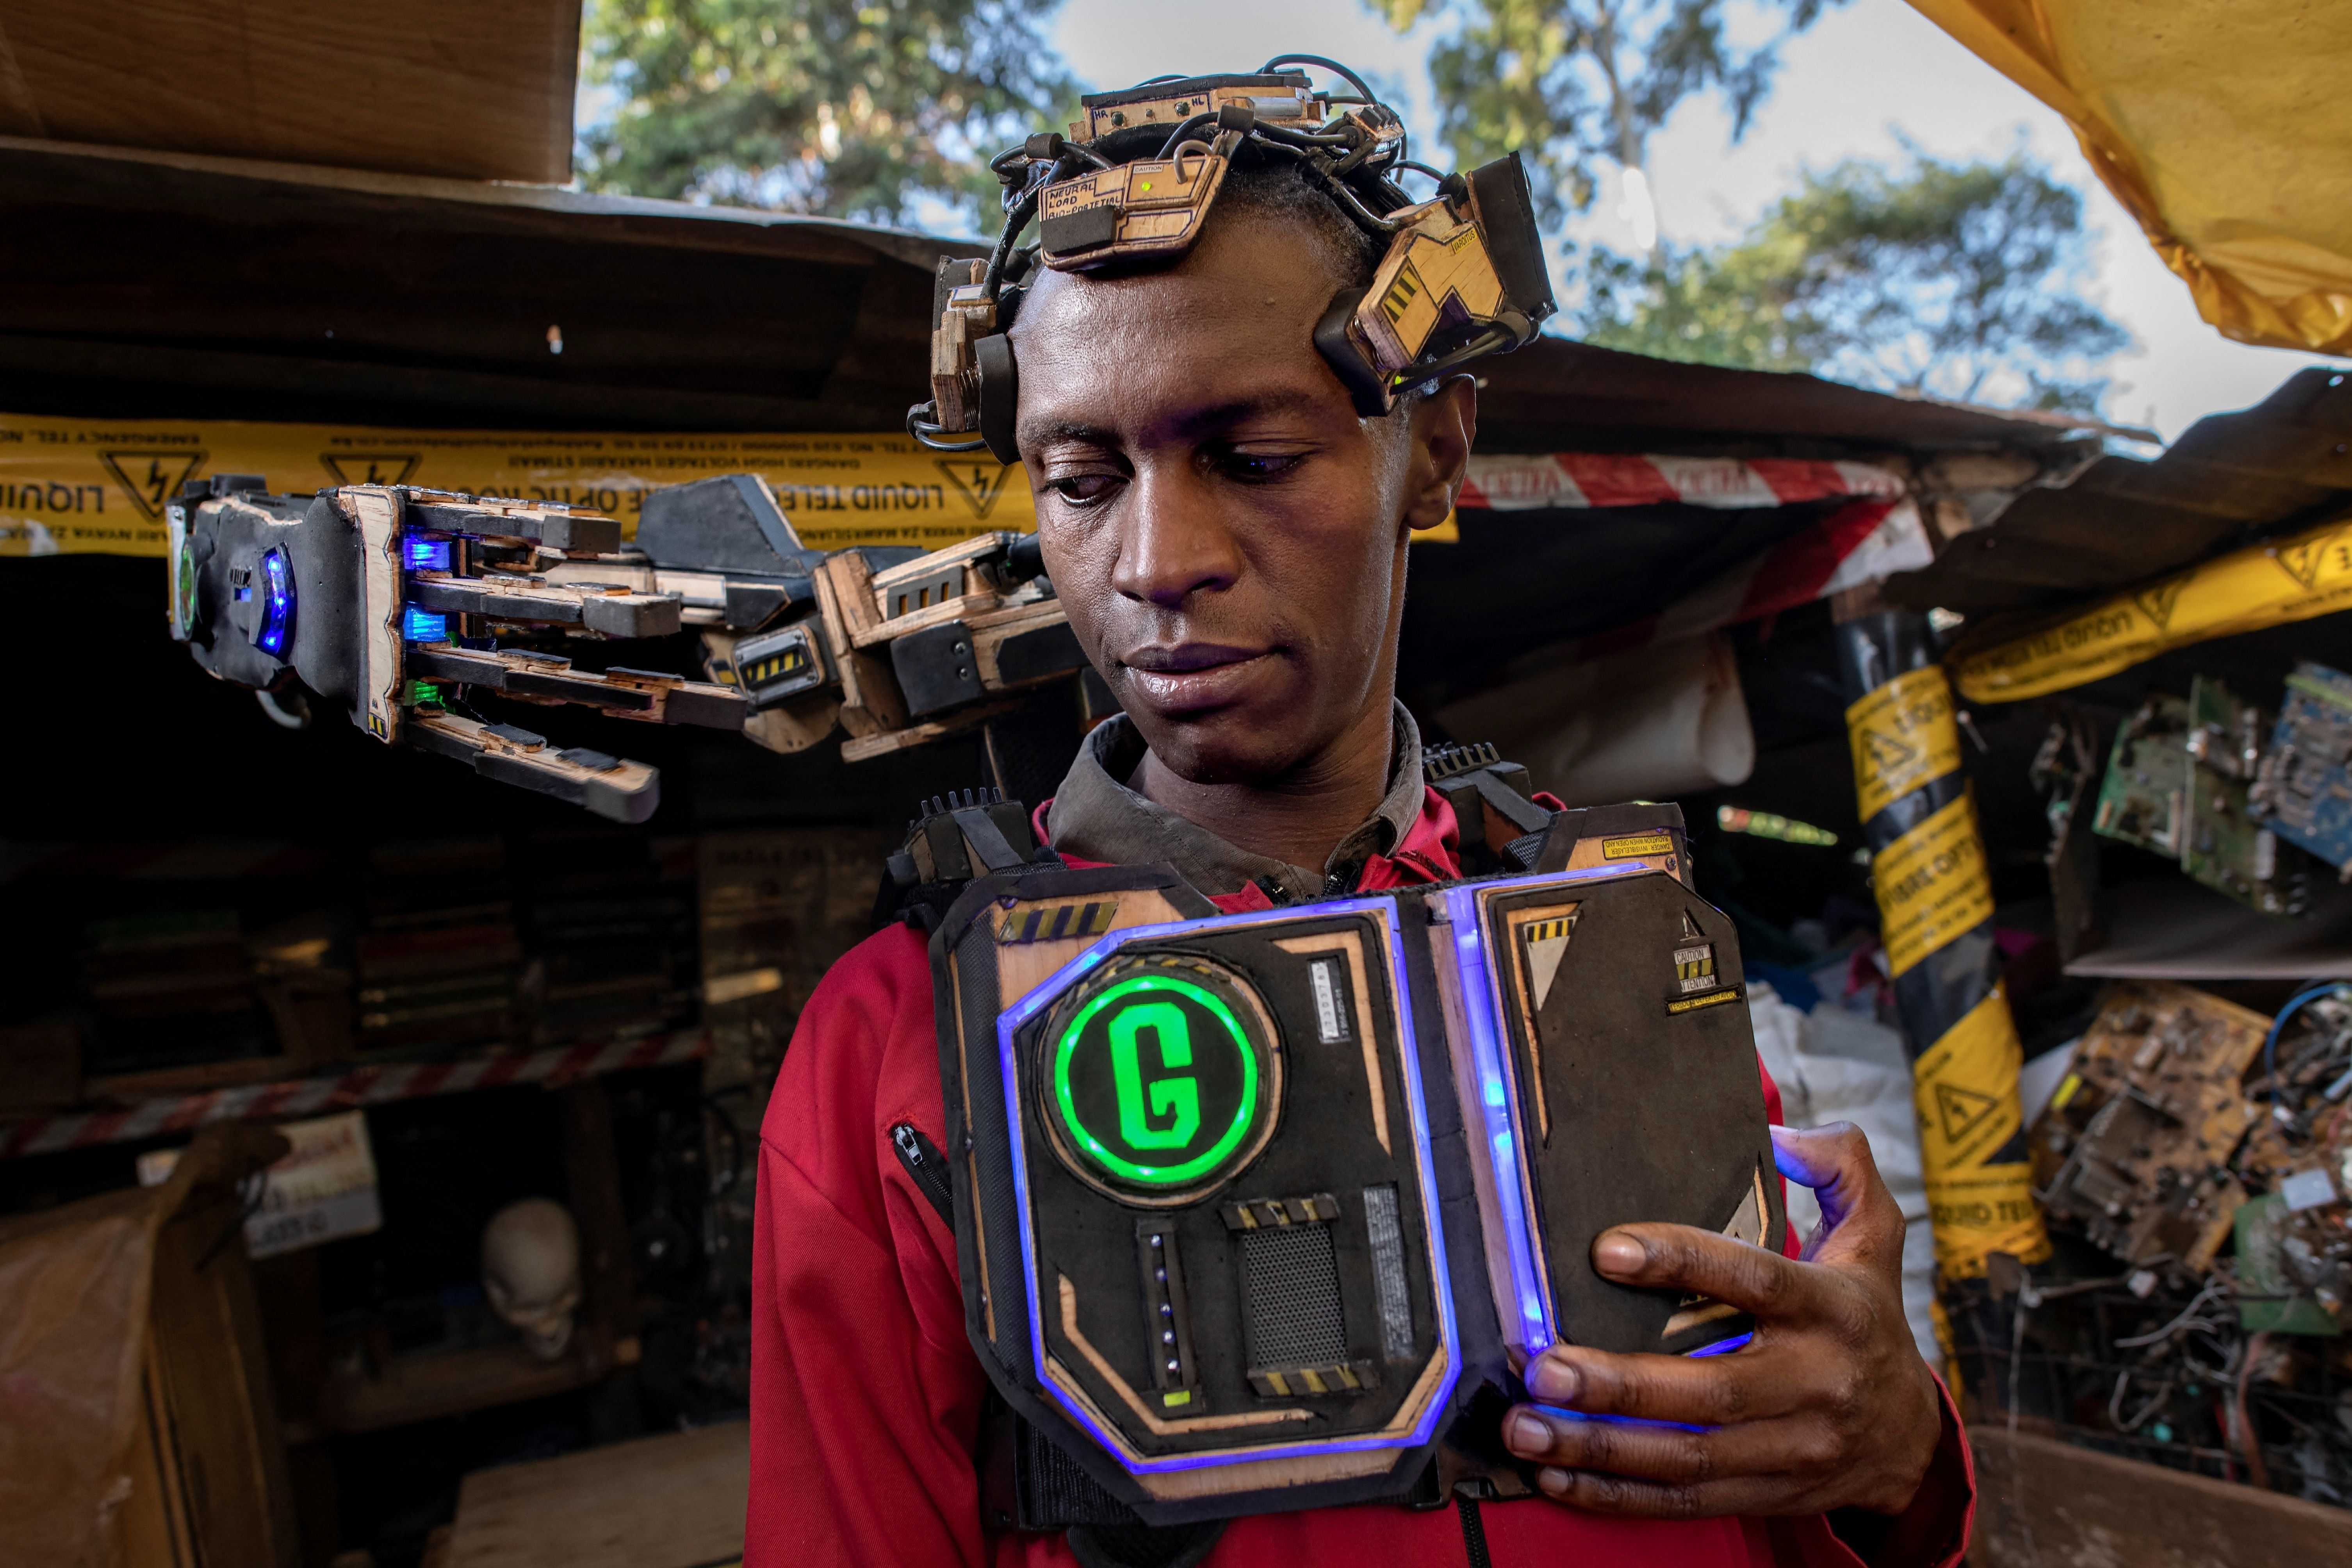 A photo of a man with various electronics parts on or attached to him.